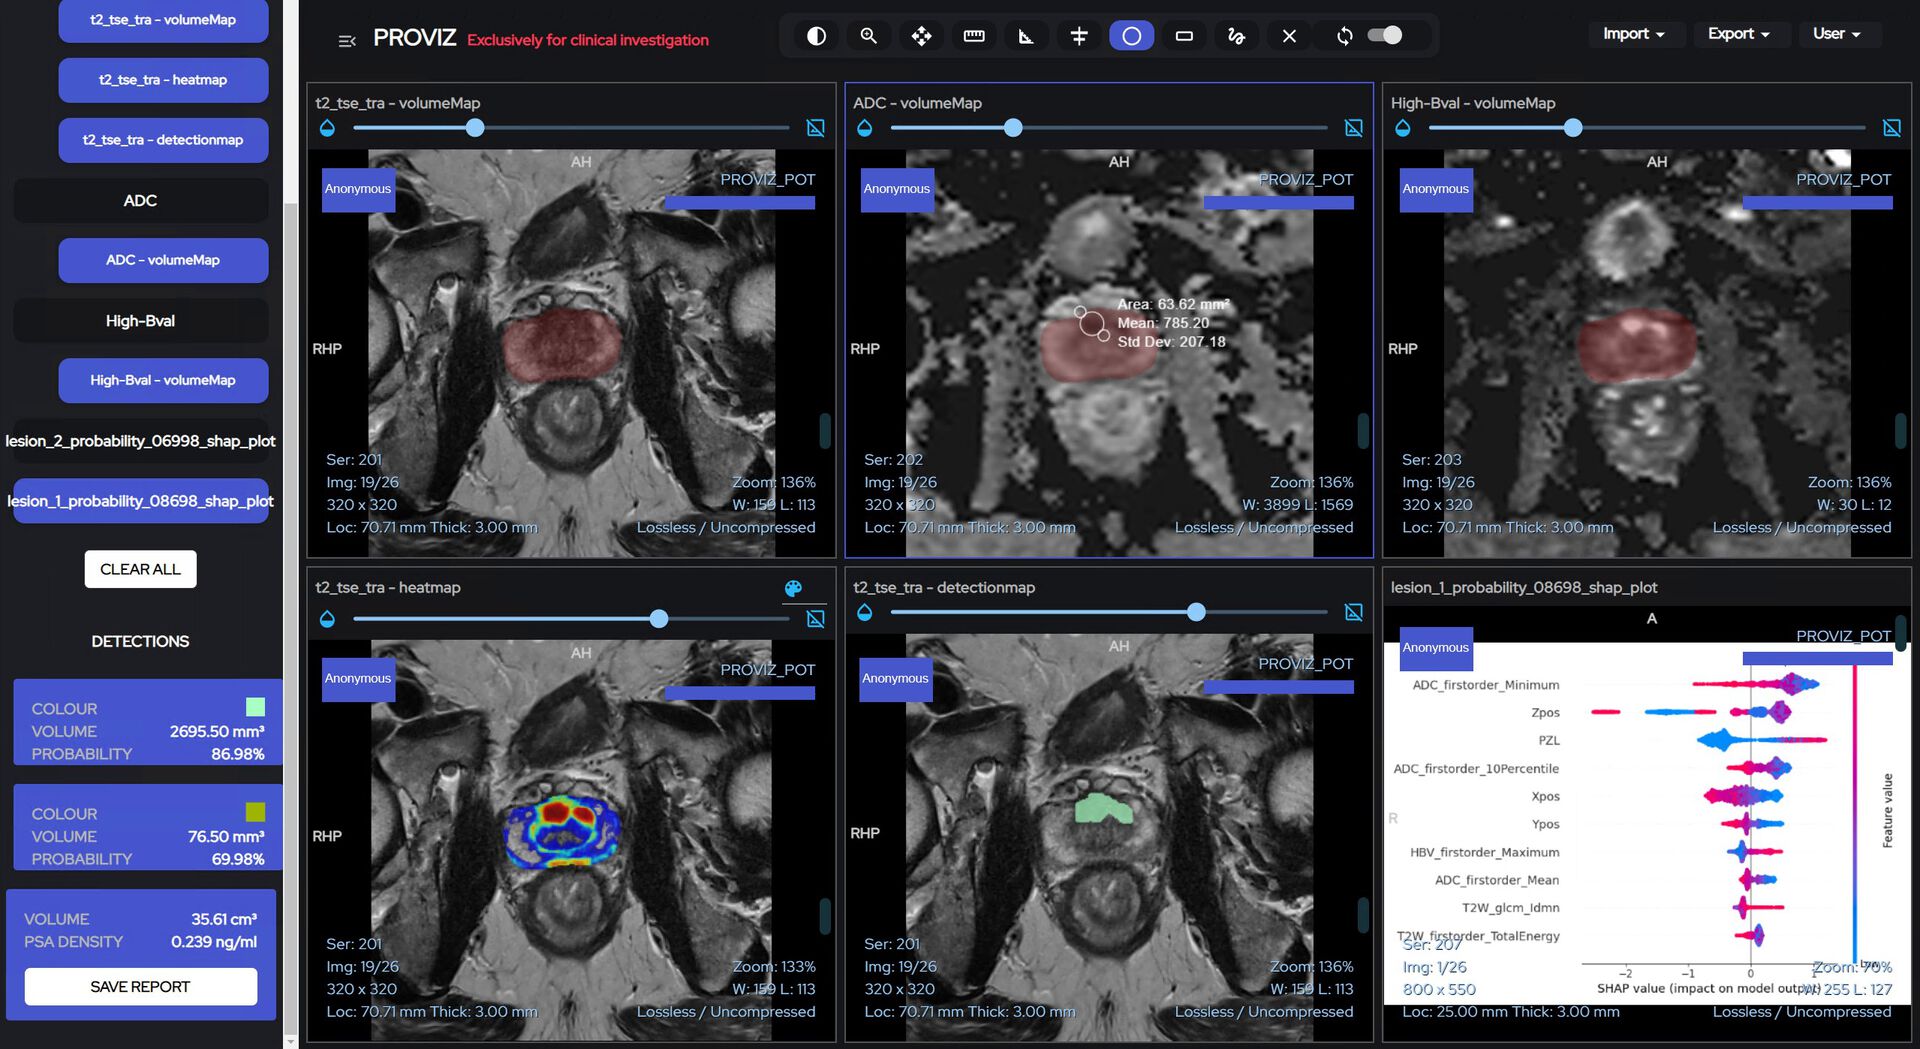 Screen-shot from the Proviz decision support tool showing the detection of a lesion in one of the men referred to the prospective proof of technology study